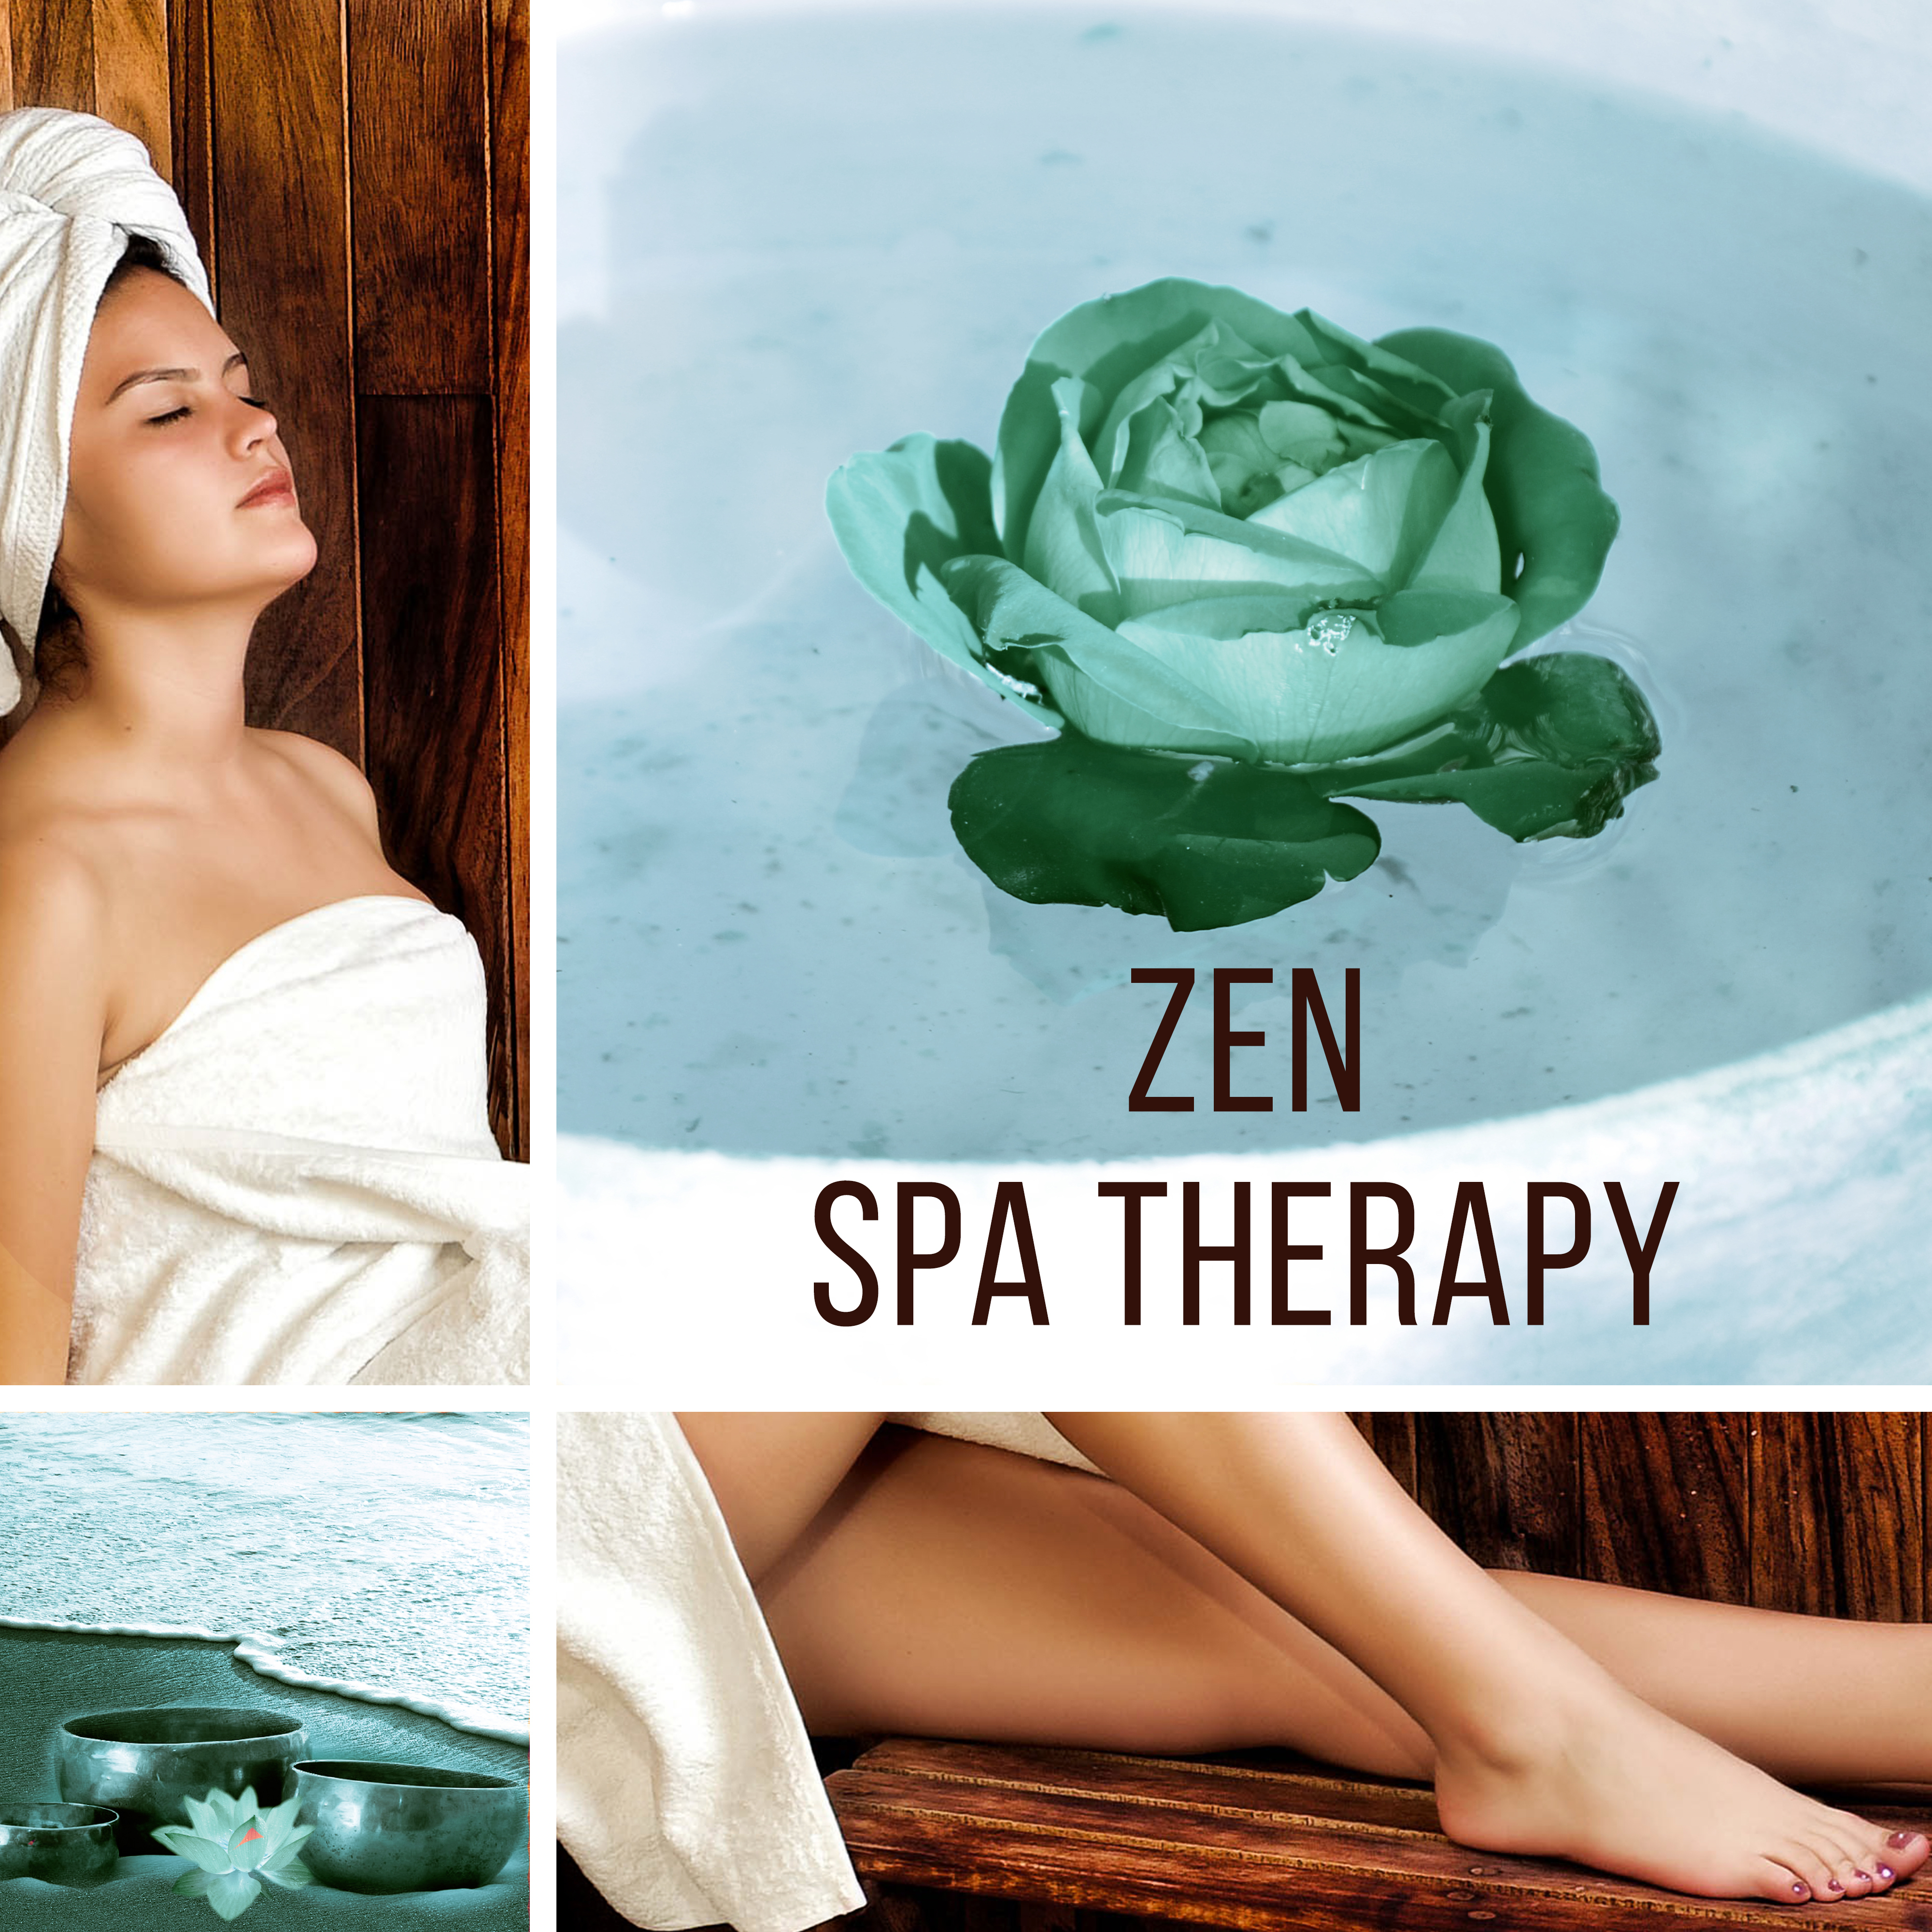 Zen Spa Therapy - Relaxation, Instrumental Music for Massage Therapy, Reiki Healing, Luxury Spa